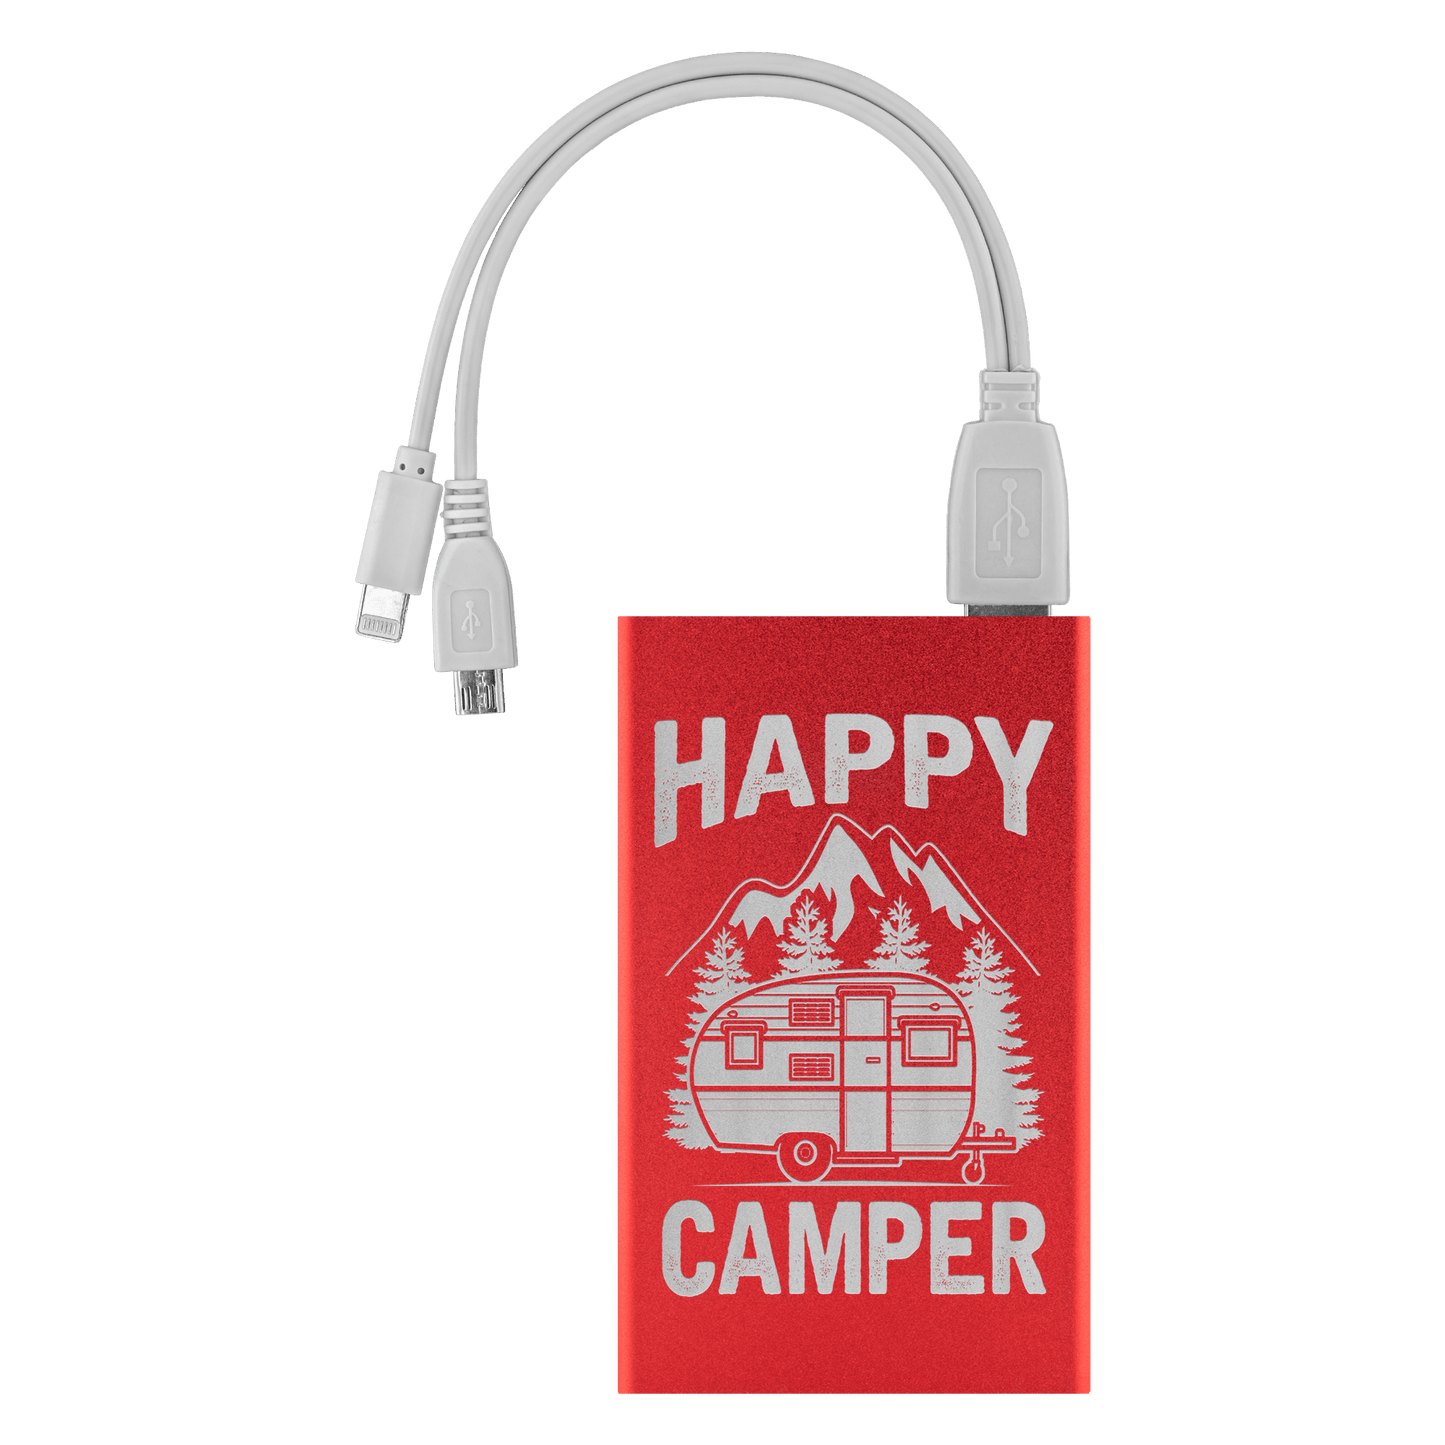 Official "Happy Camper" USB Power Bank Charger